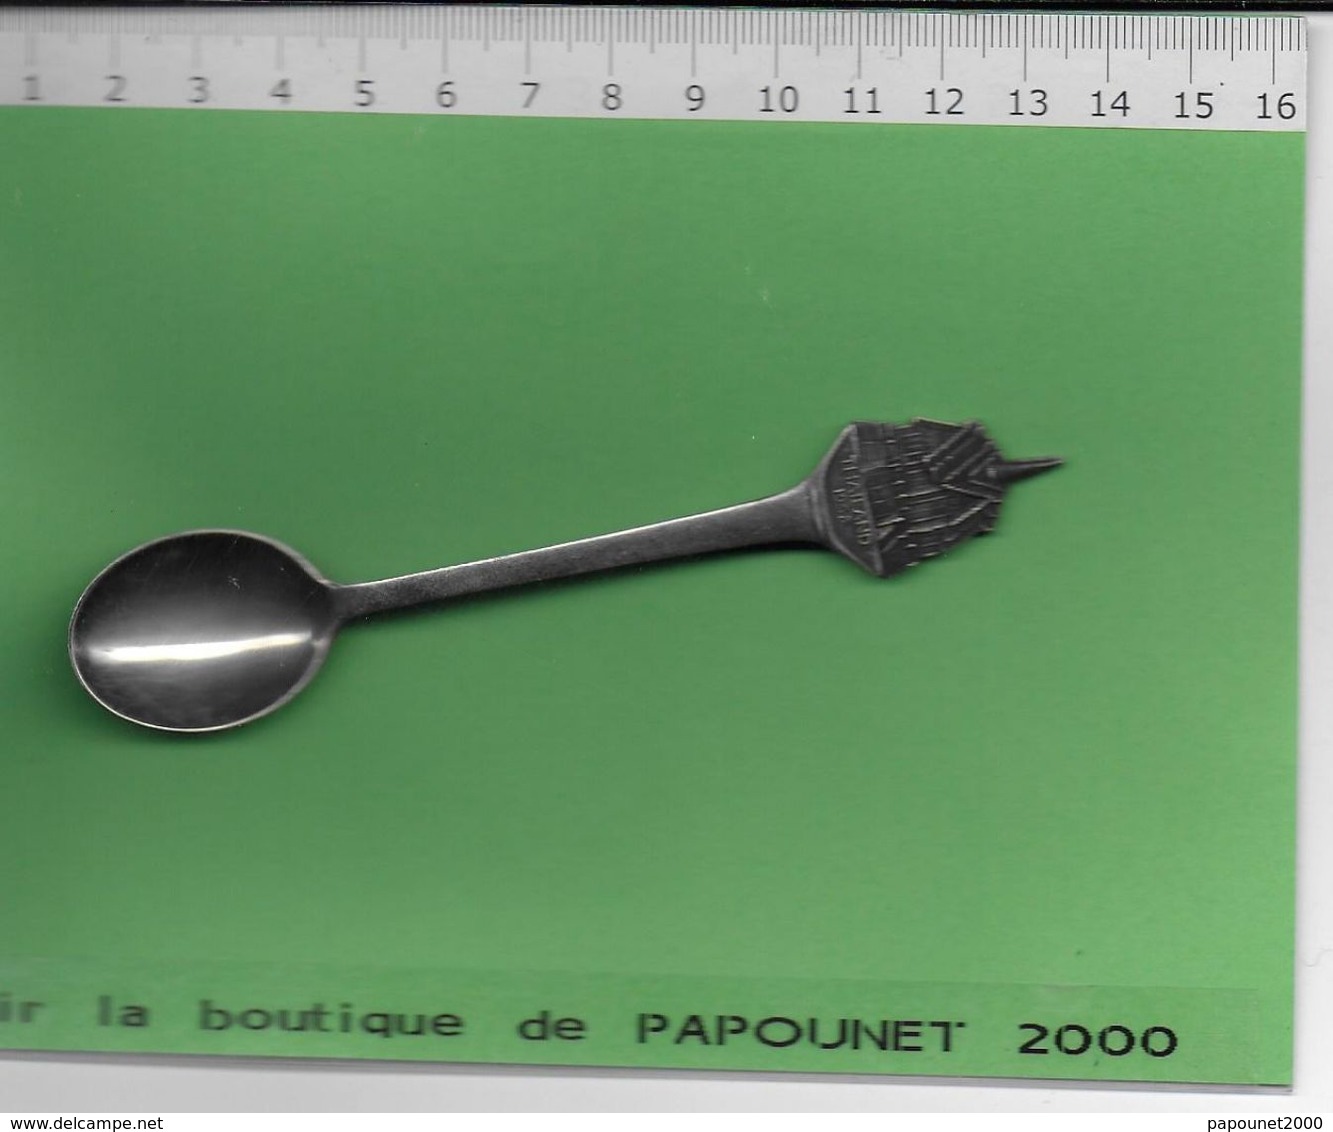 000713-06345-A.C.-A/A.-C.-EXPO 58 - Spoons